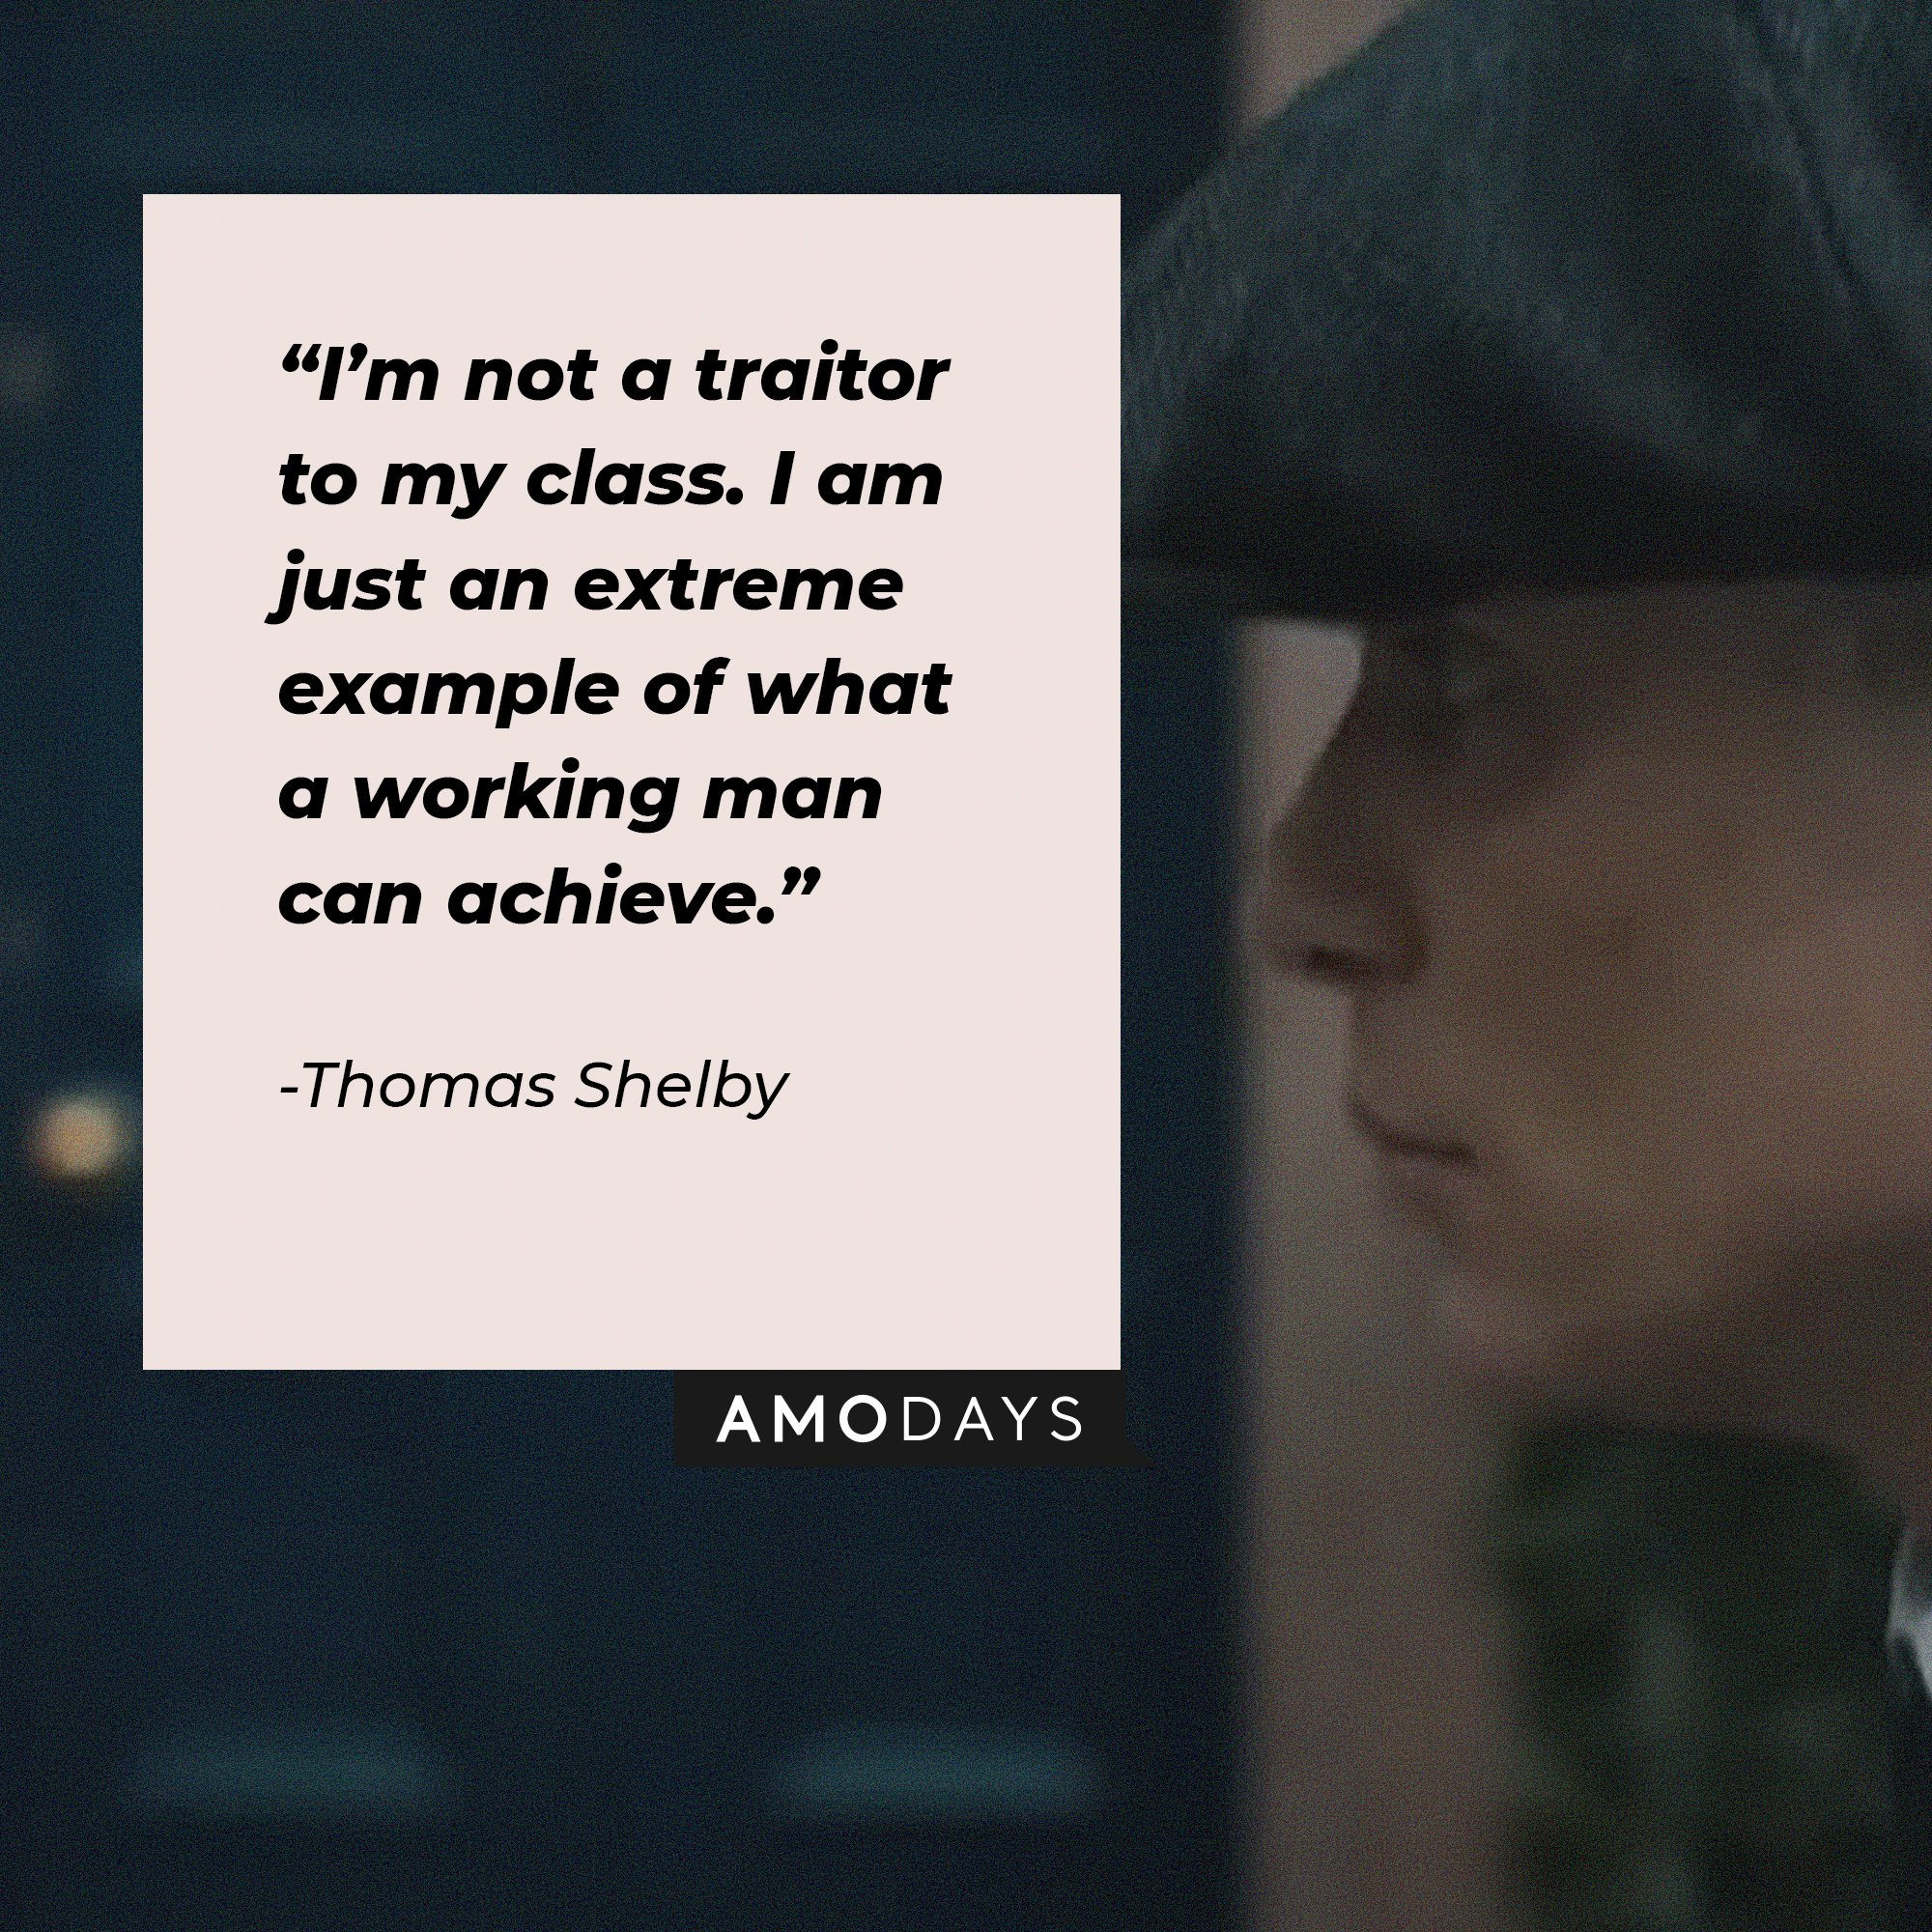 Thomas Shelby's quote: “I’m not a traitor to my class. I am just an extreme example of what a working man can achieve.”  | Image: AmoDays